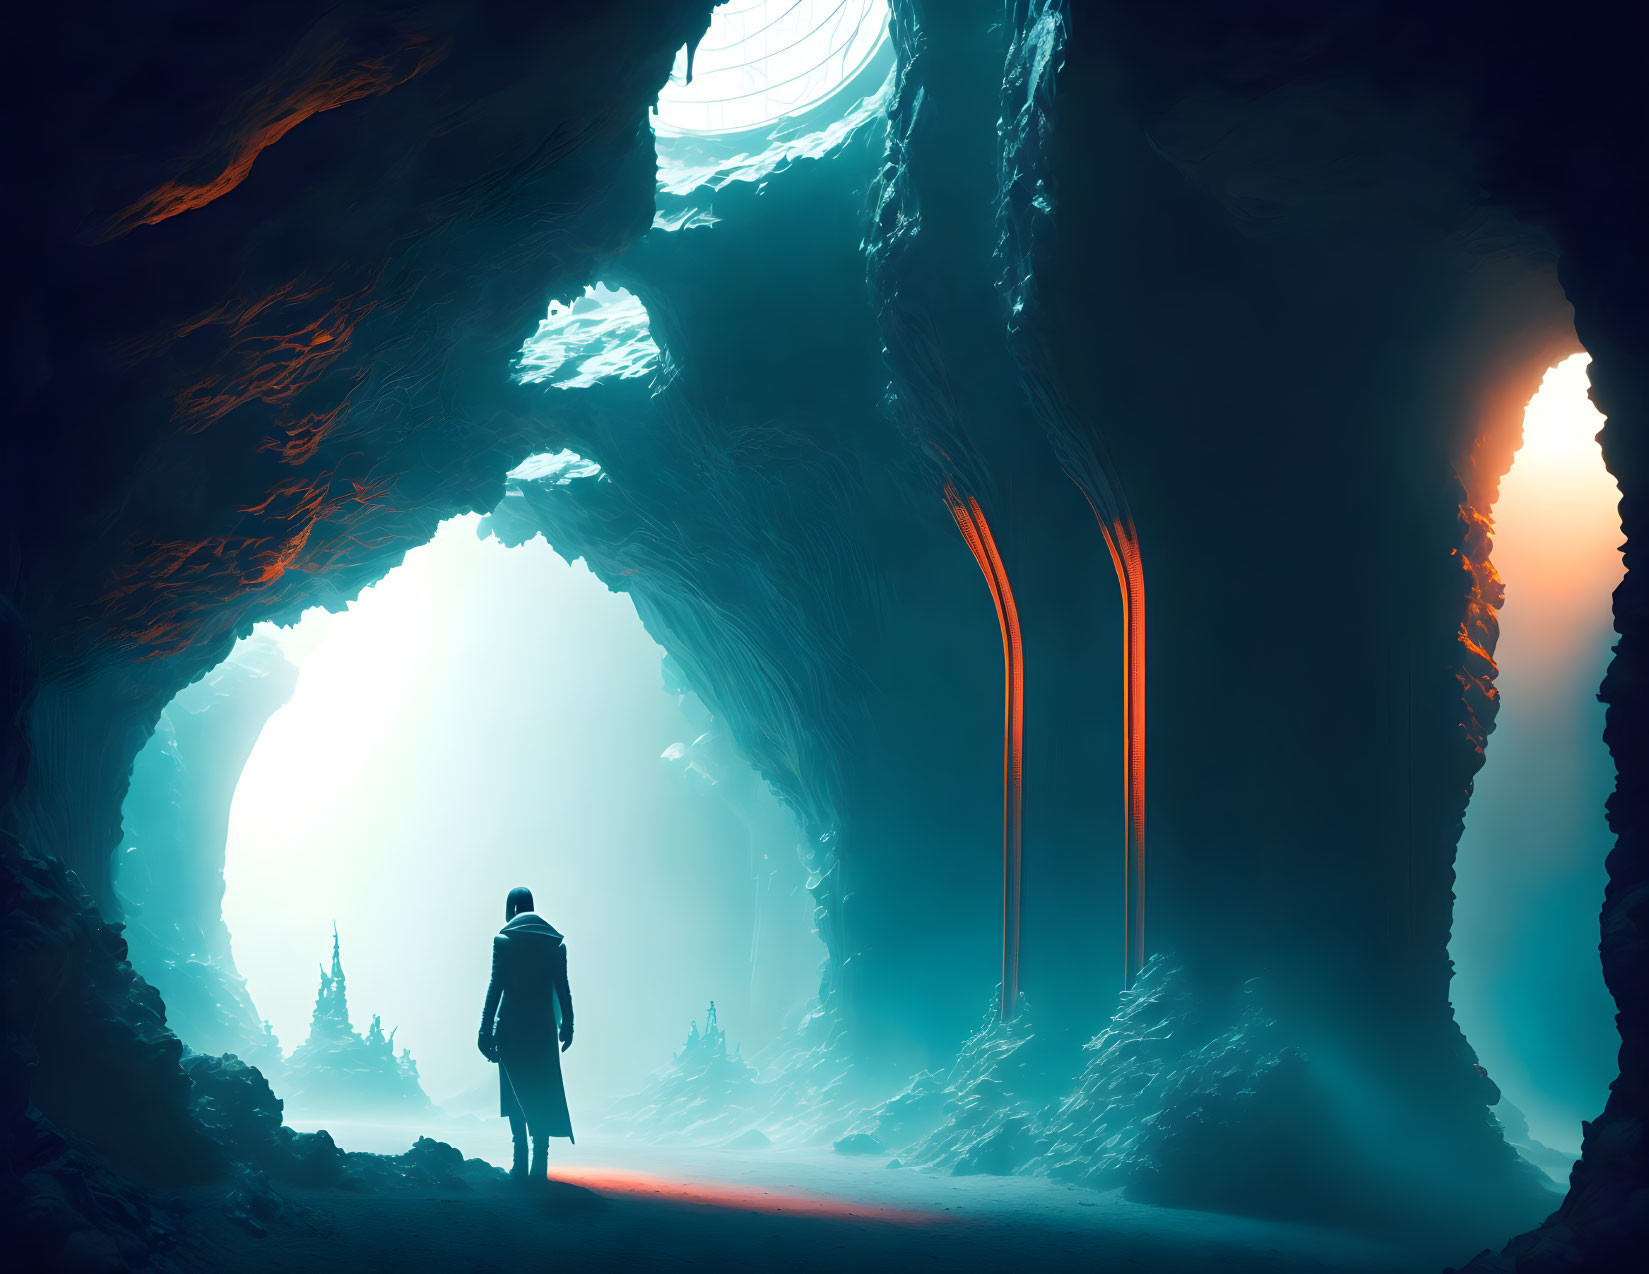 Solitary figure at entrance of illuminated cave with light beams and trees in the distance